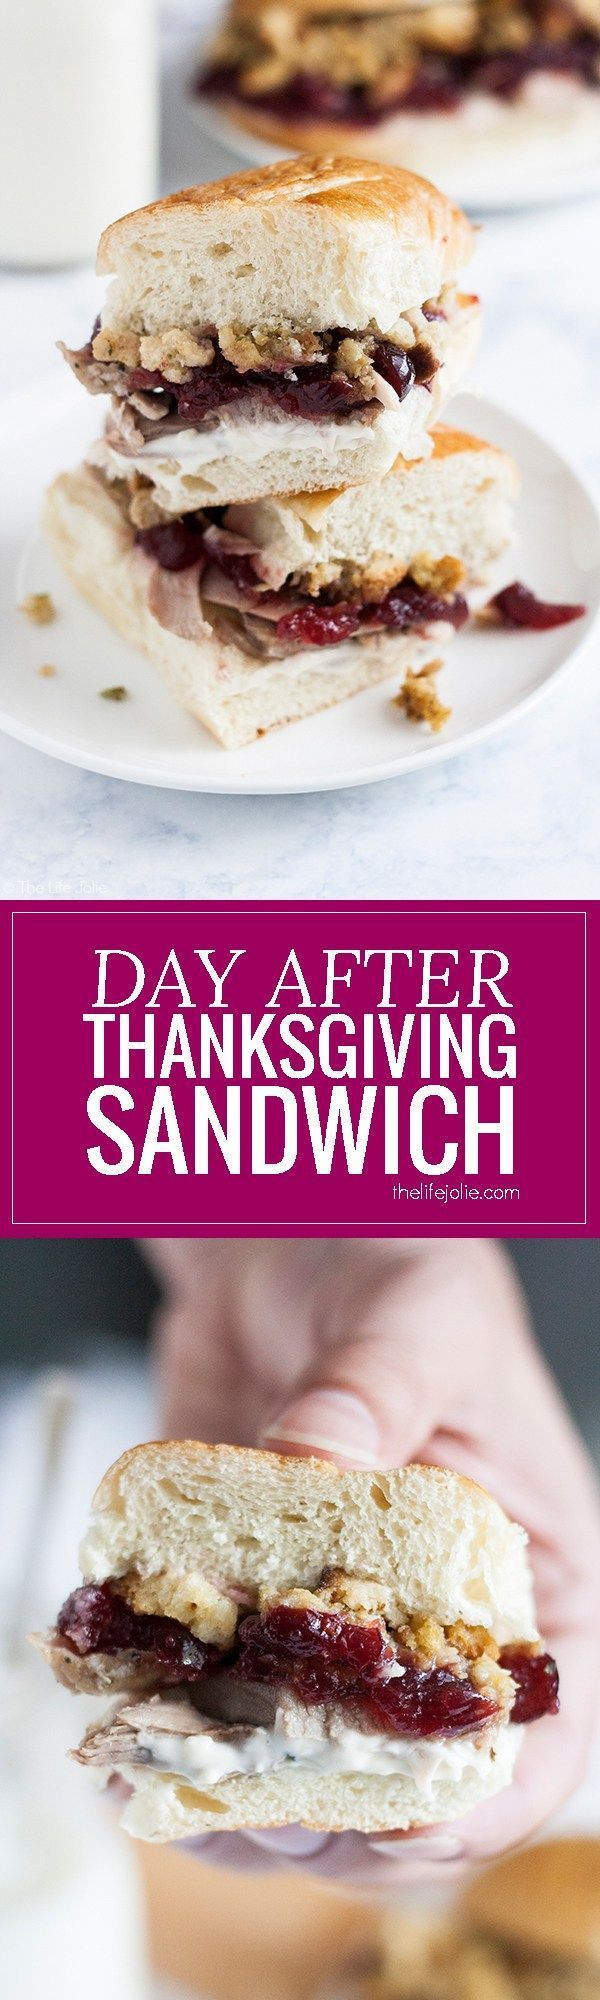 After Thanksgiving Turkey Recipes
 Day After Thanksgiving Sandwich Recipe